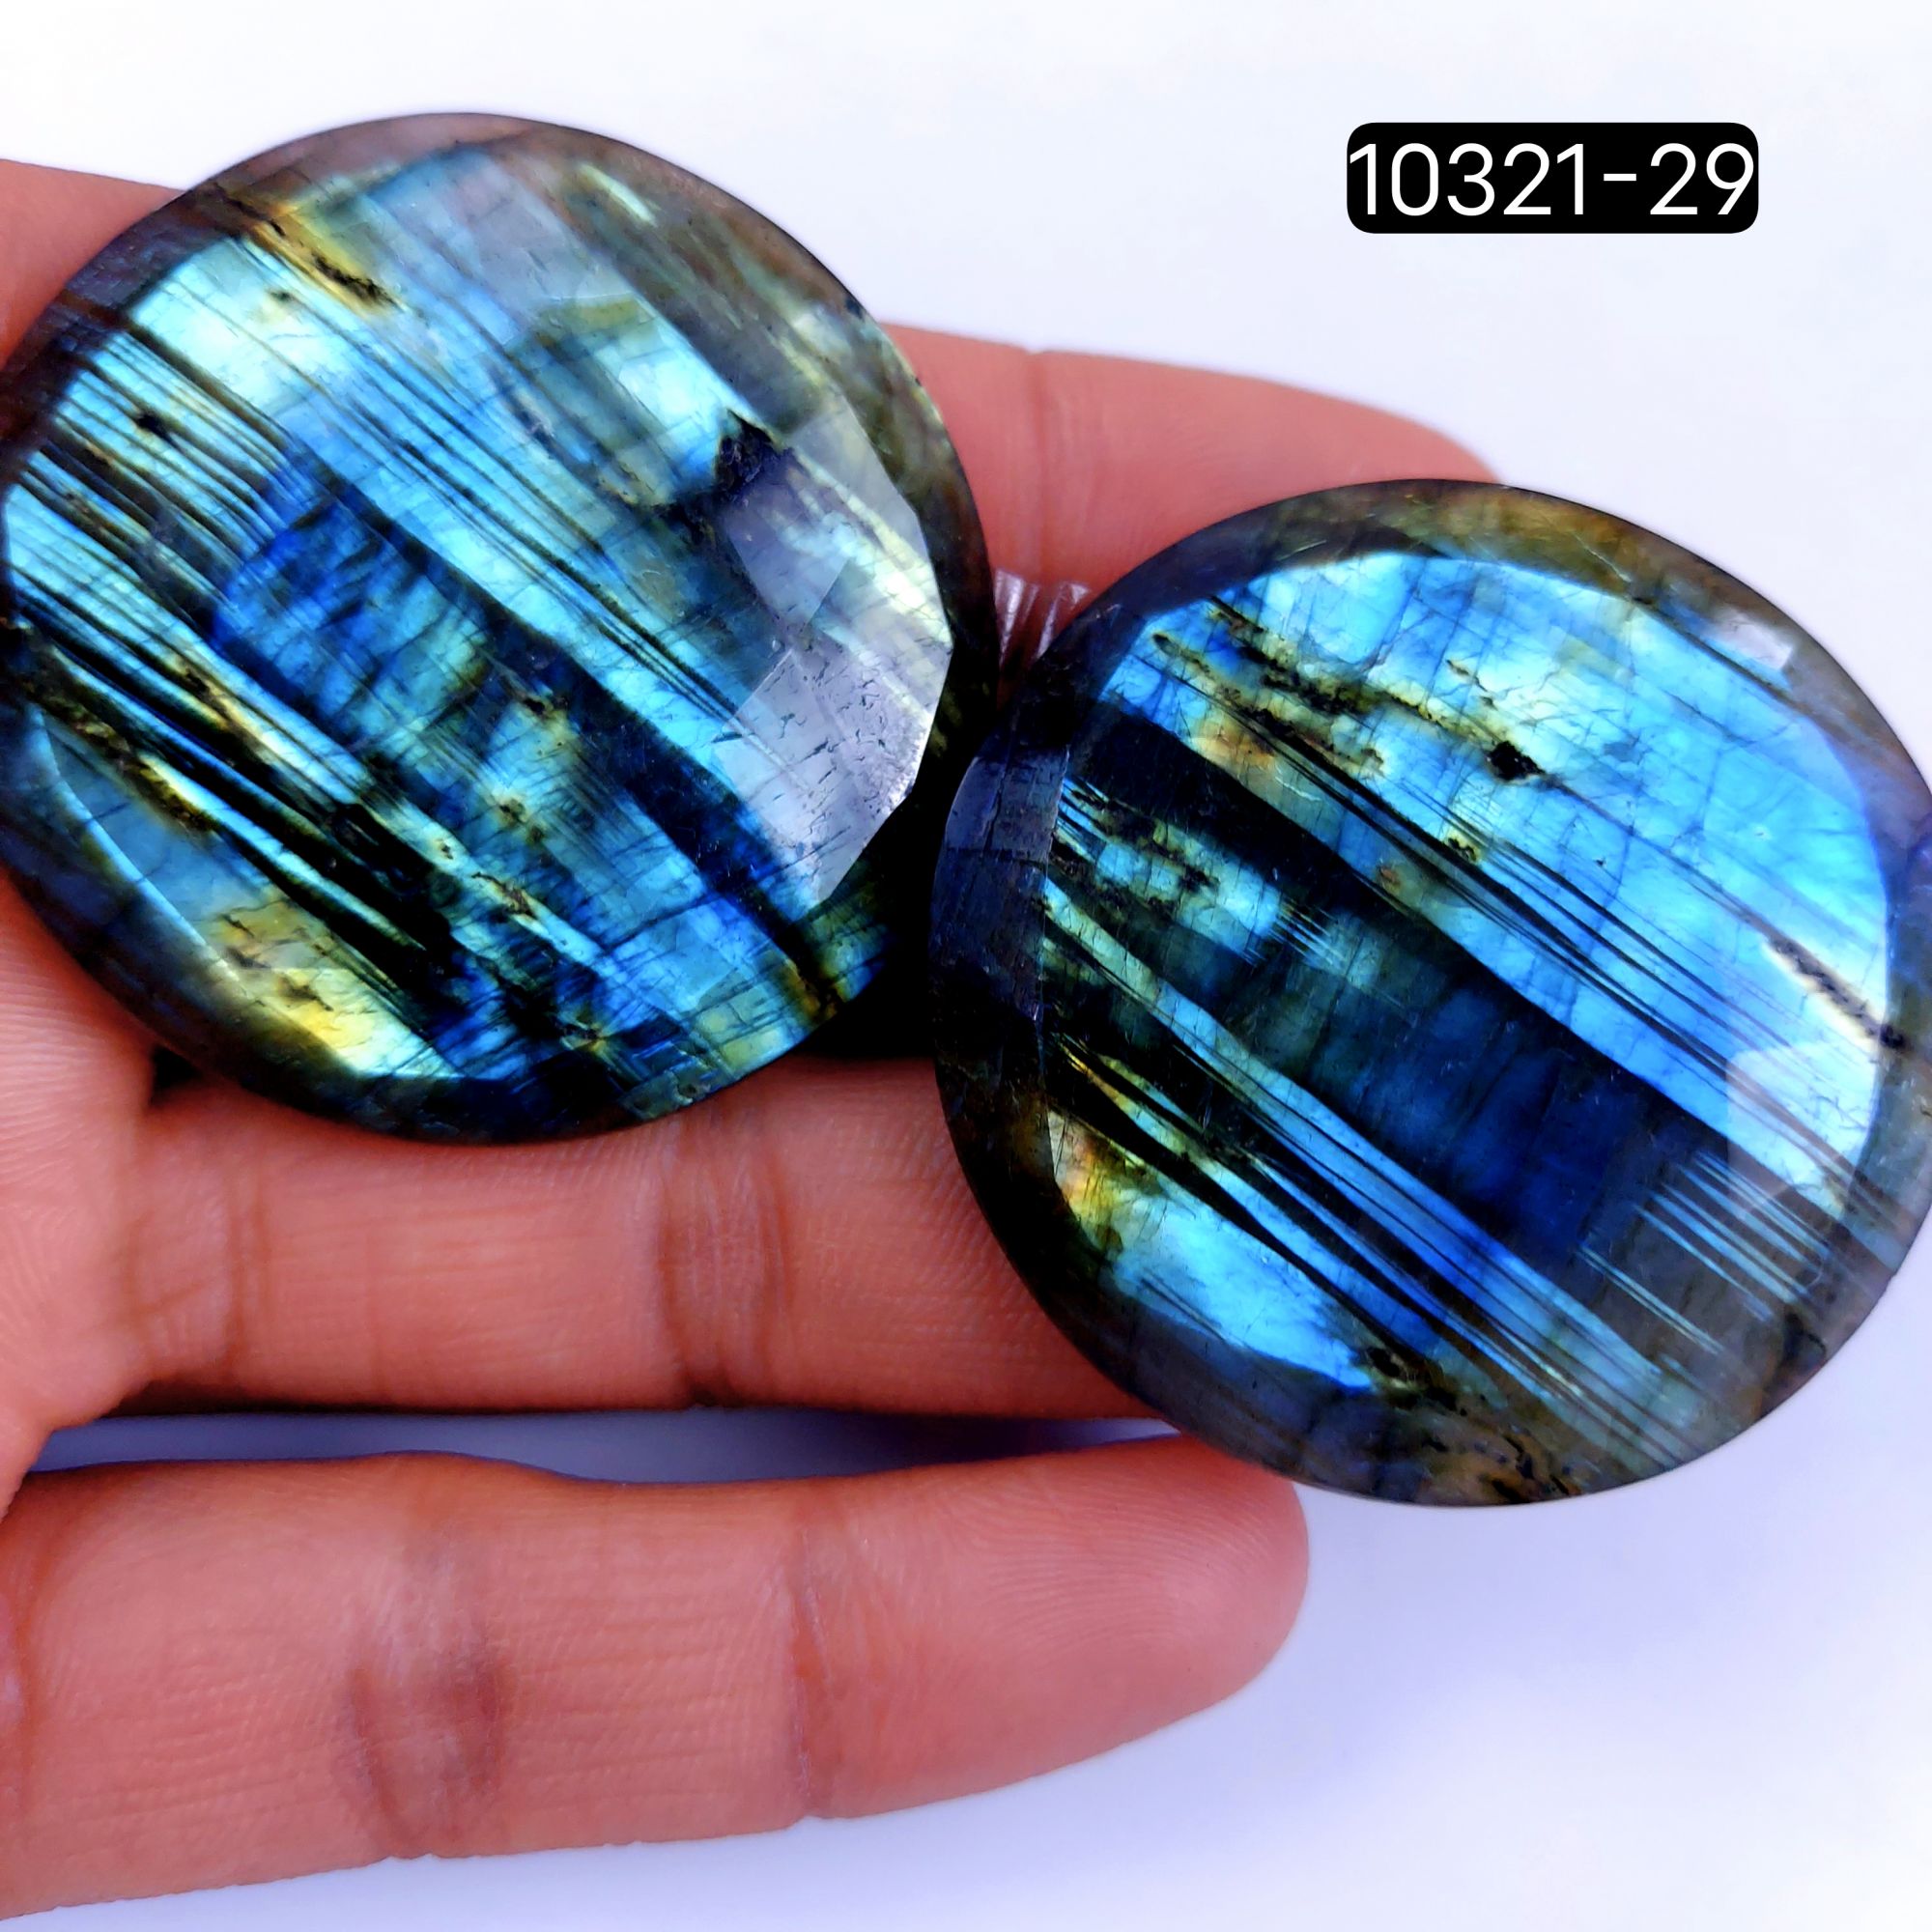 266Cts Natural Labradorite Faceted Cabochon Pair Polished Loose Gemstone Flat Back Multi Jewelry Making Crystal  45x45mm #10321-29